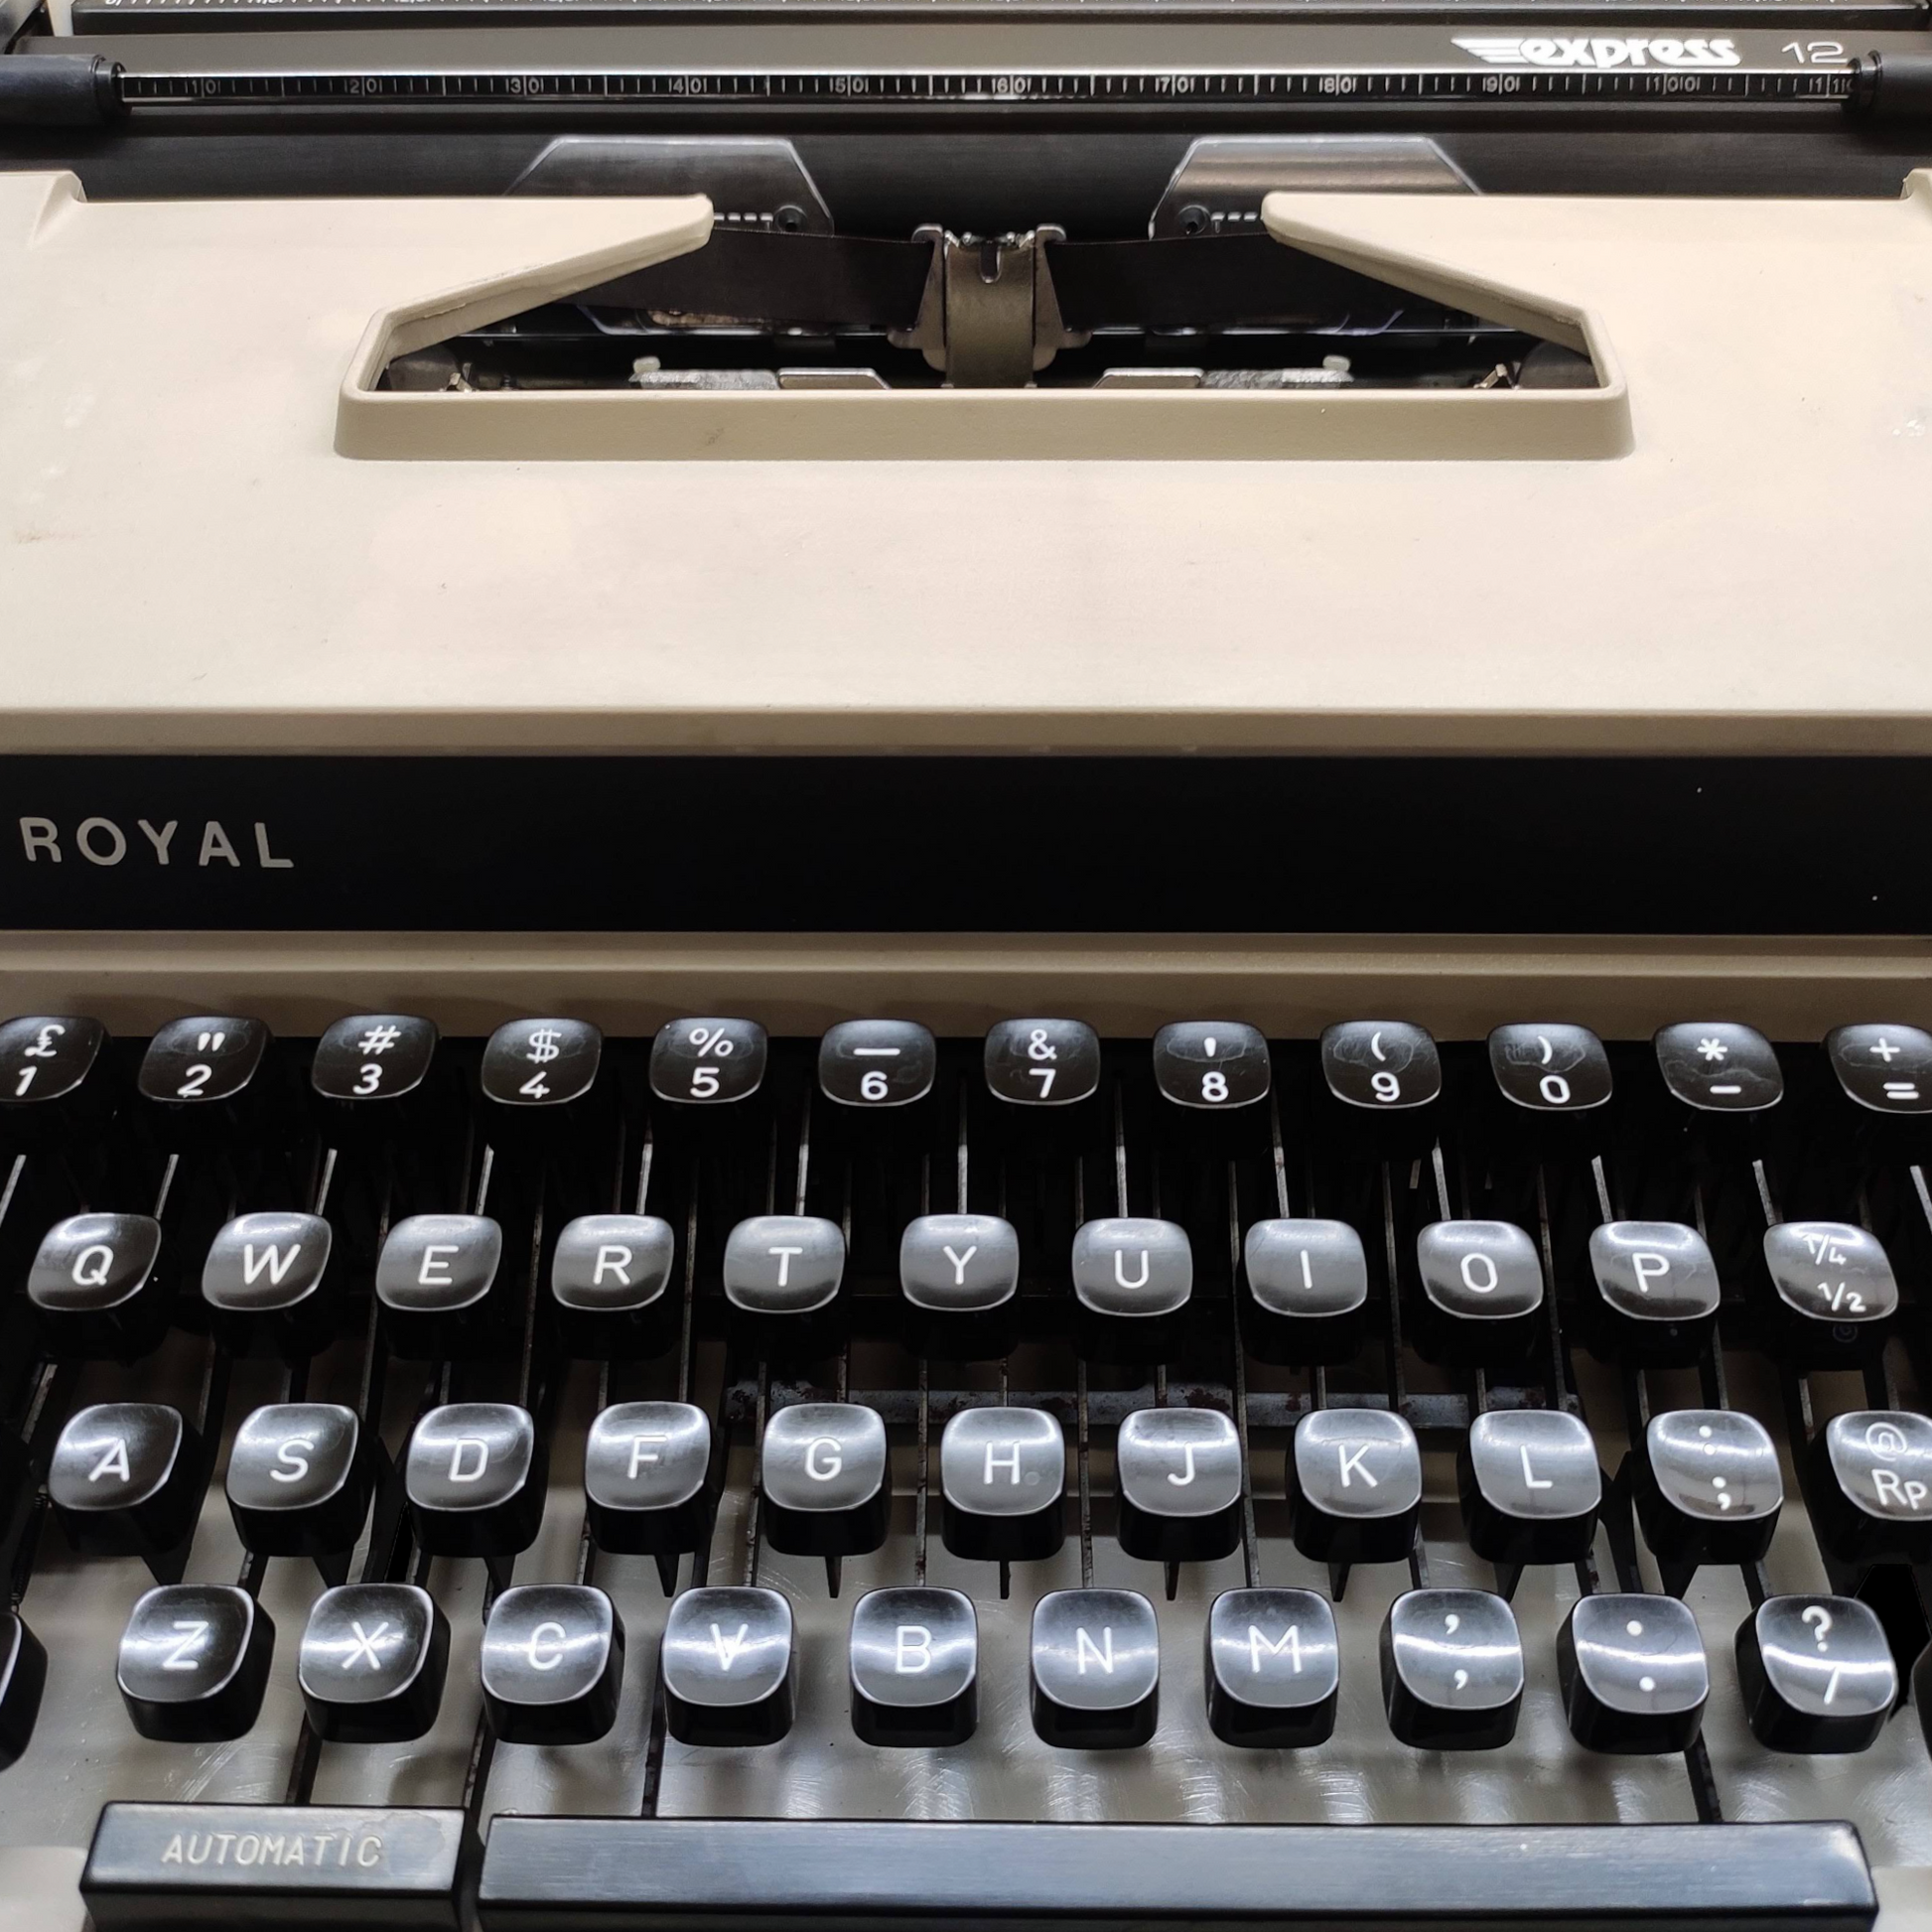 Image of Royal Express 12 Typewriter. Available from universaltypewritercompany.in